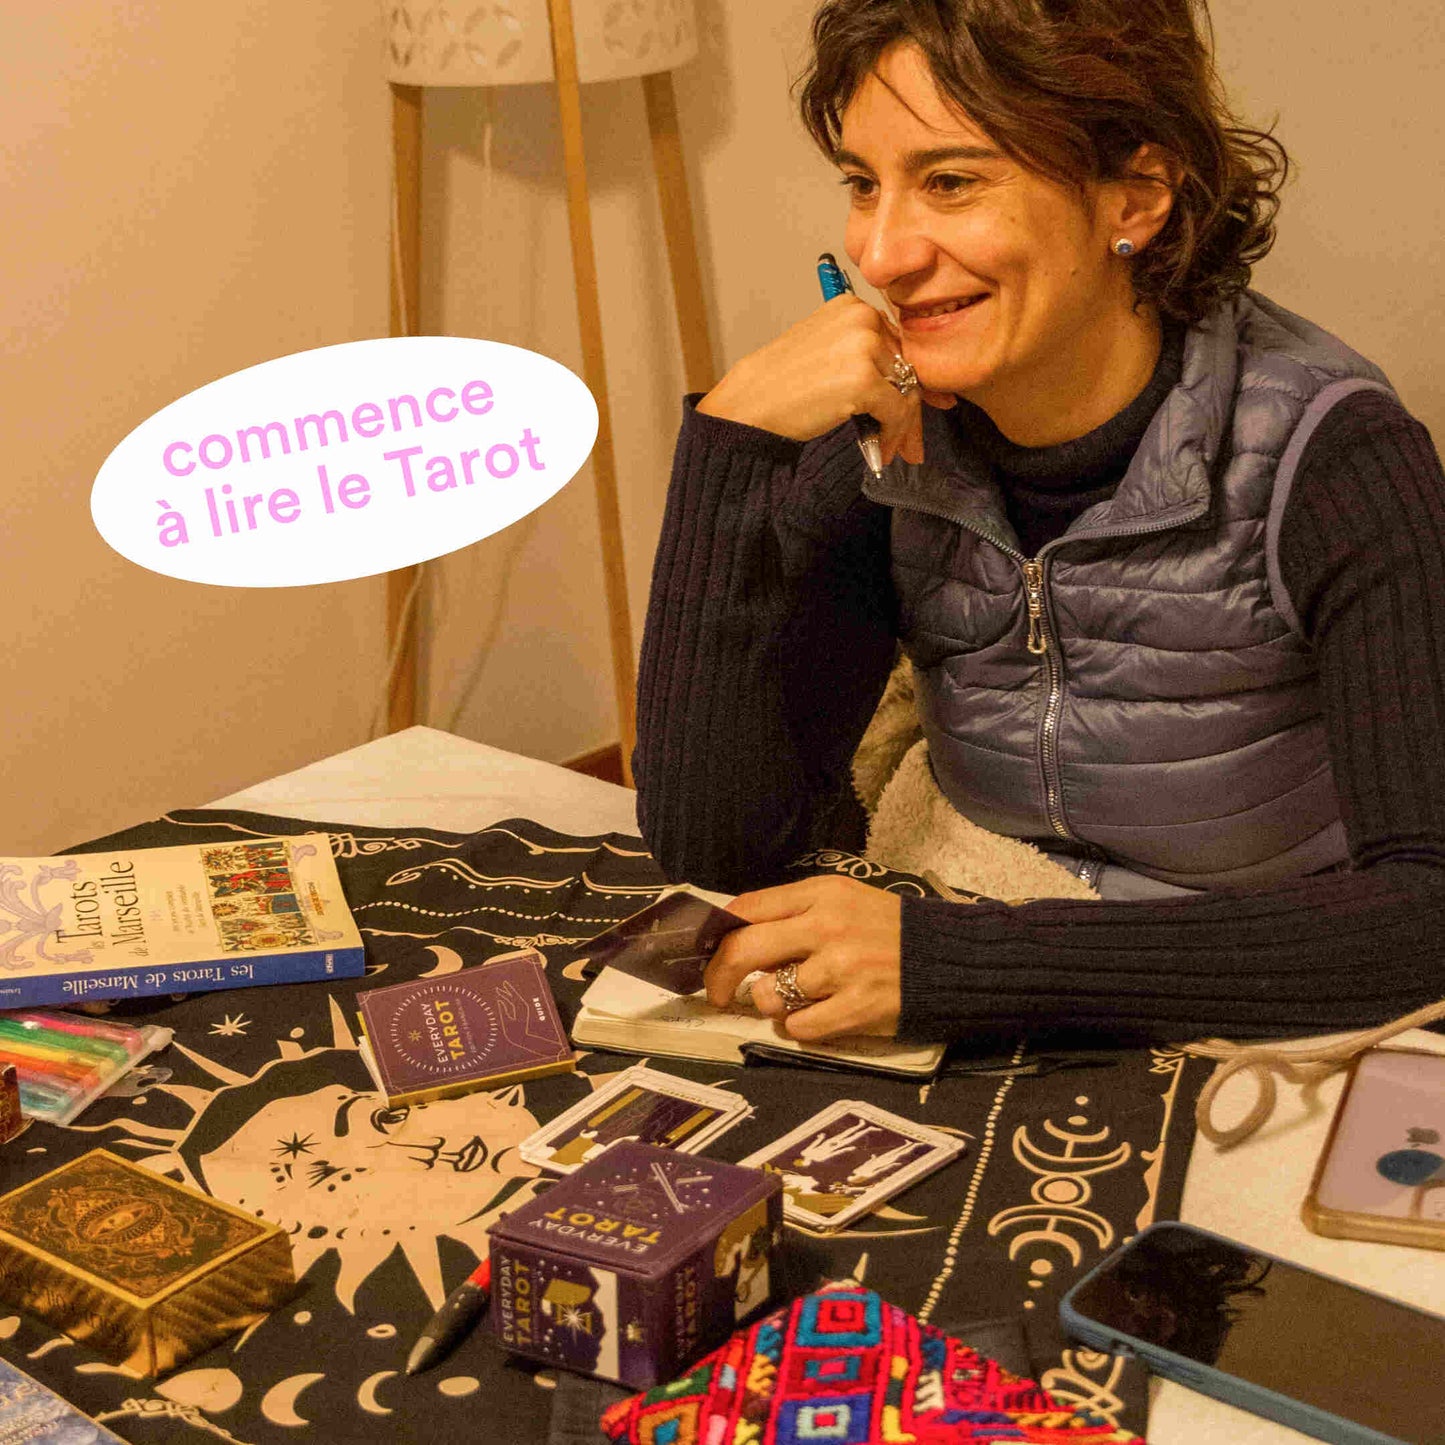 Book your Therapeutic Tarot Course - online or/and presencial in Barcelona